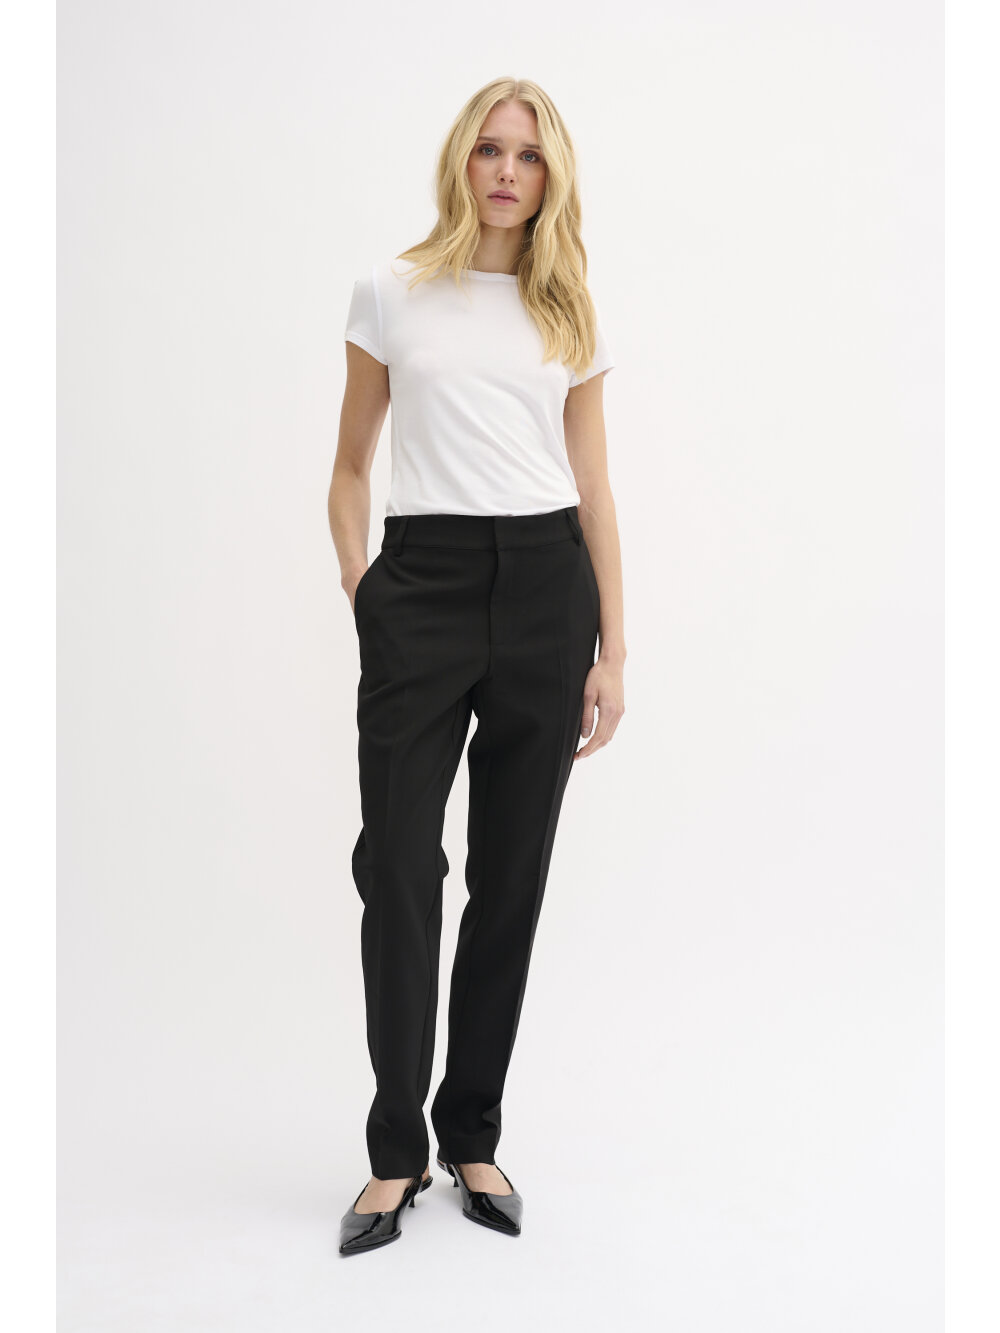 My Essential Wardrobe - 26 THE TAILORED STRAIGHT PANT